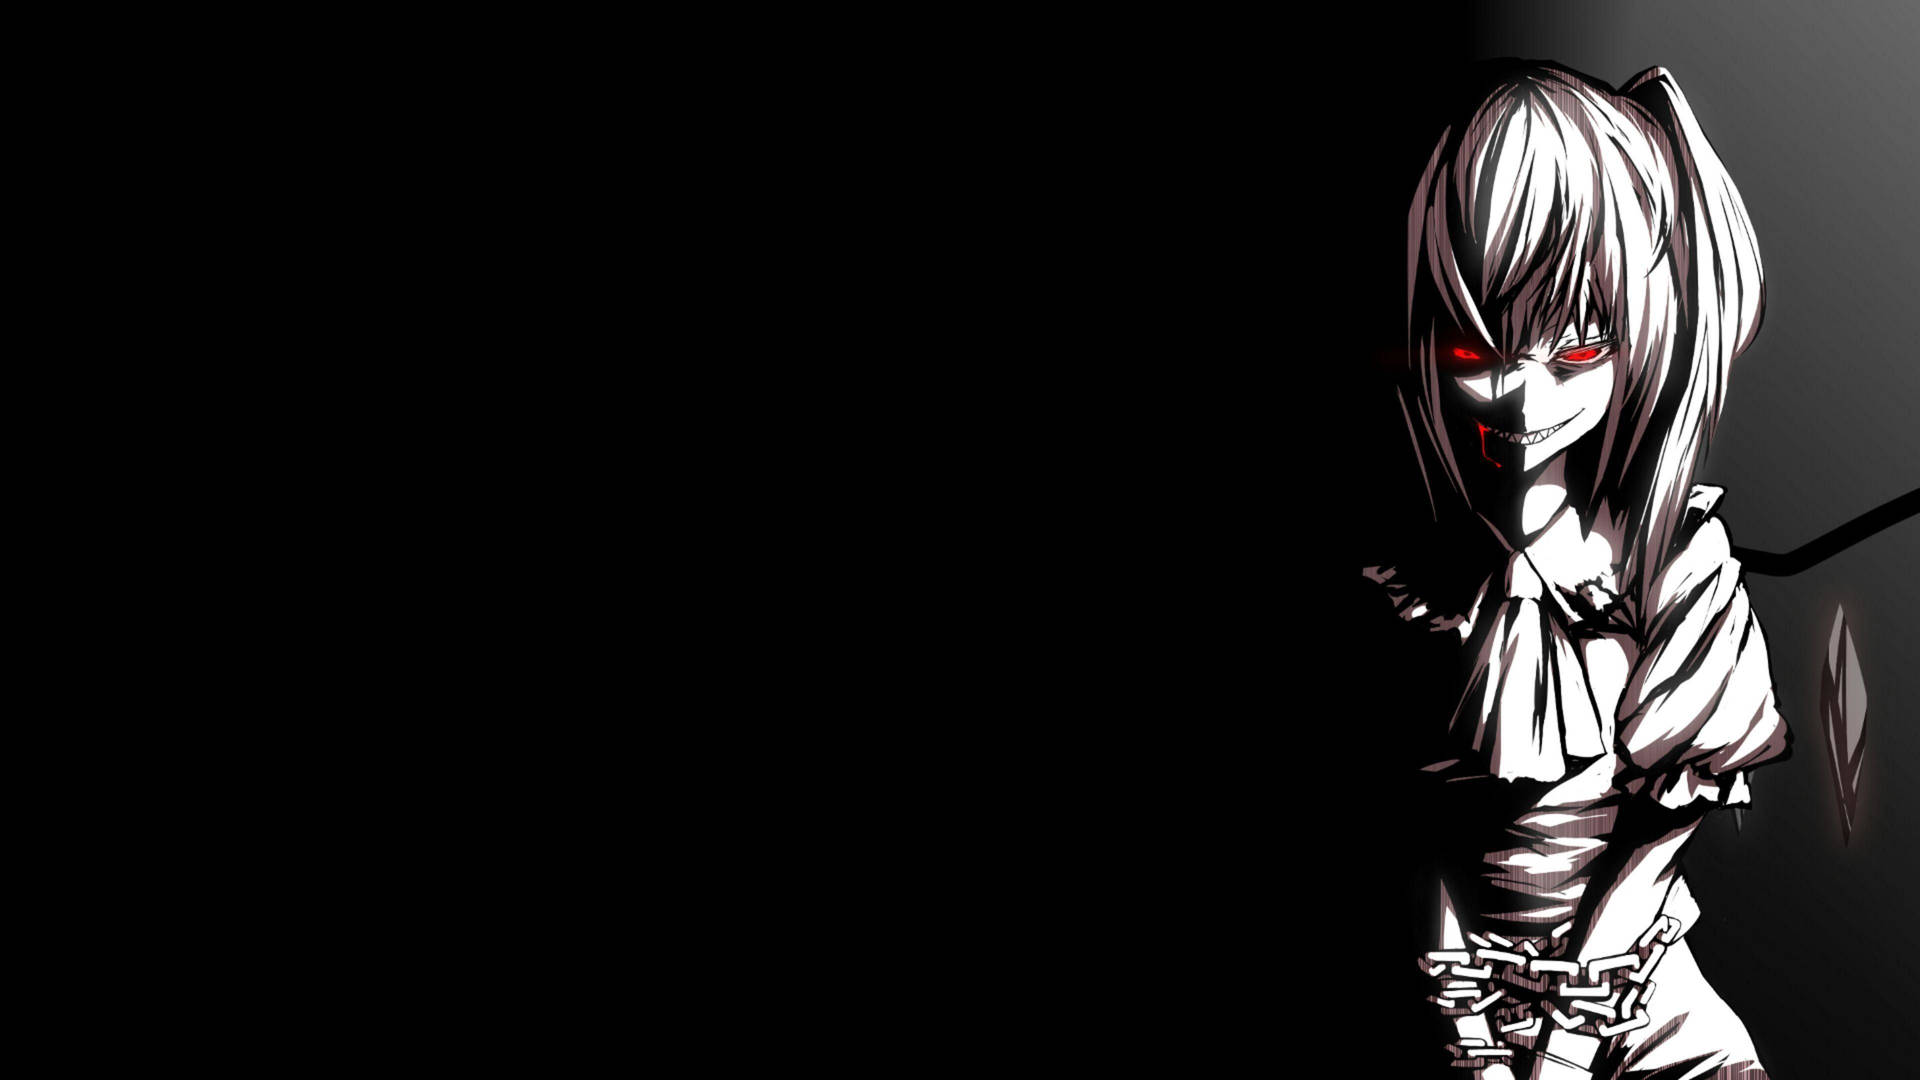 Chained Anime Demon Wallpaper